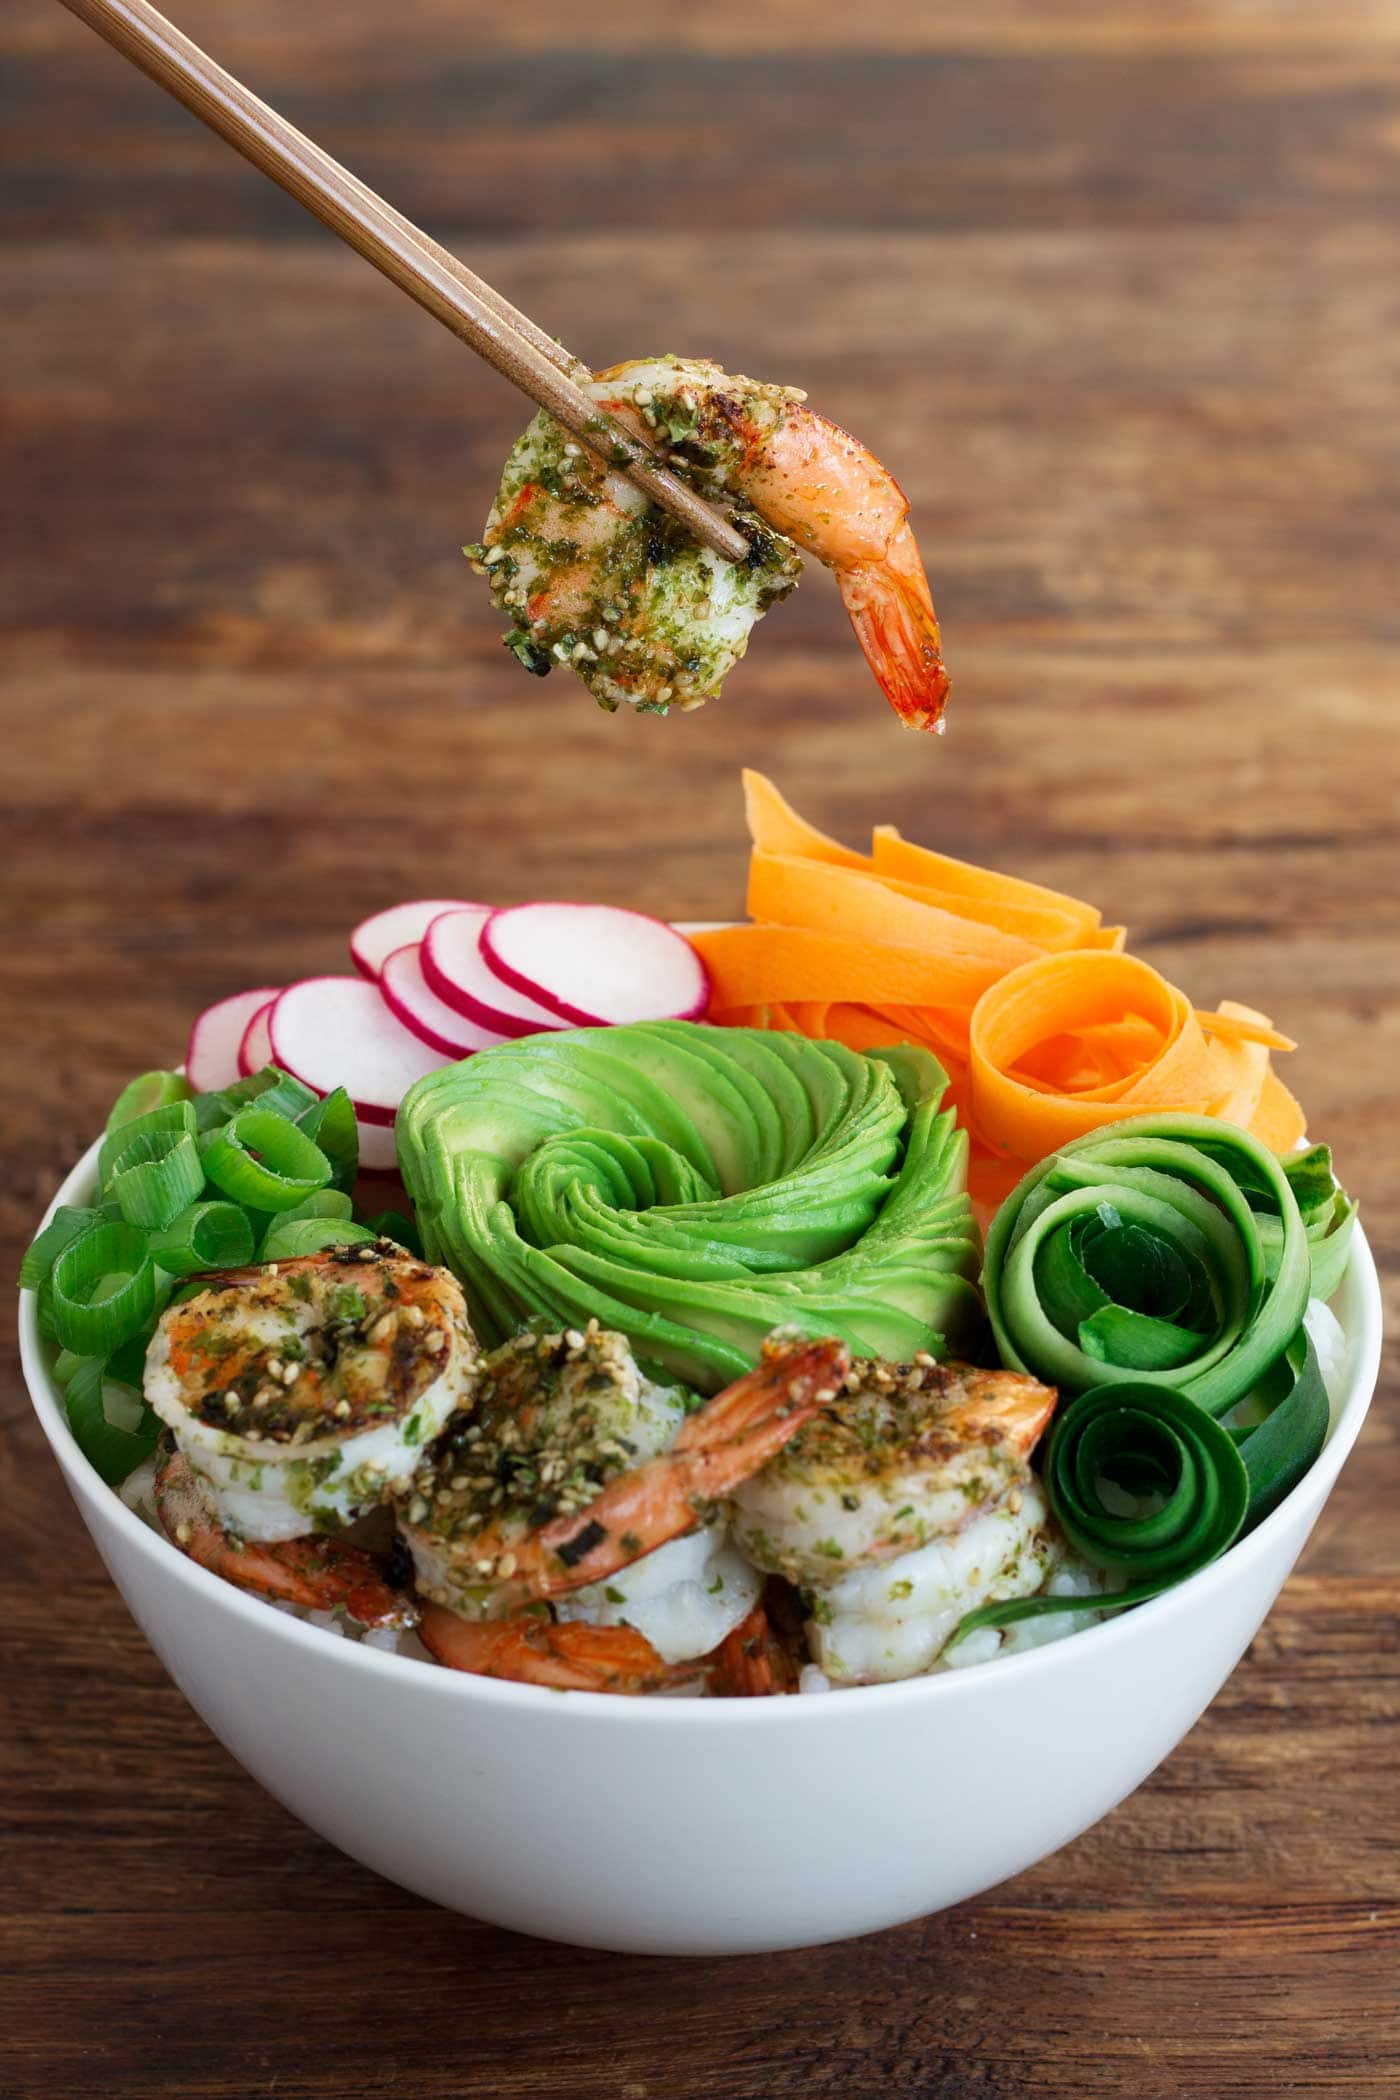 These sushi bowls only take 25 mins to make and are perfect for a quick weeknight meal. They are gluten free and can be made paleo and low carb/keto!